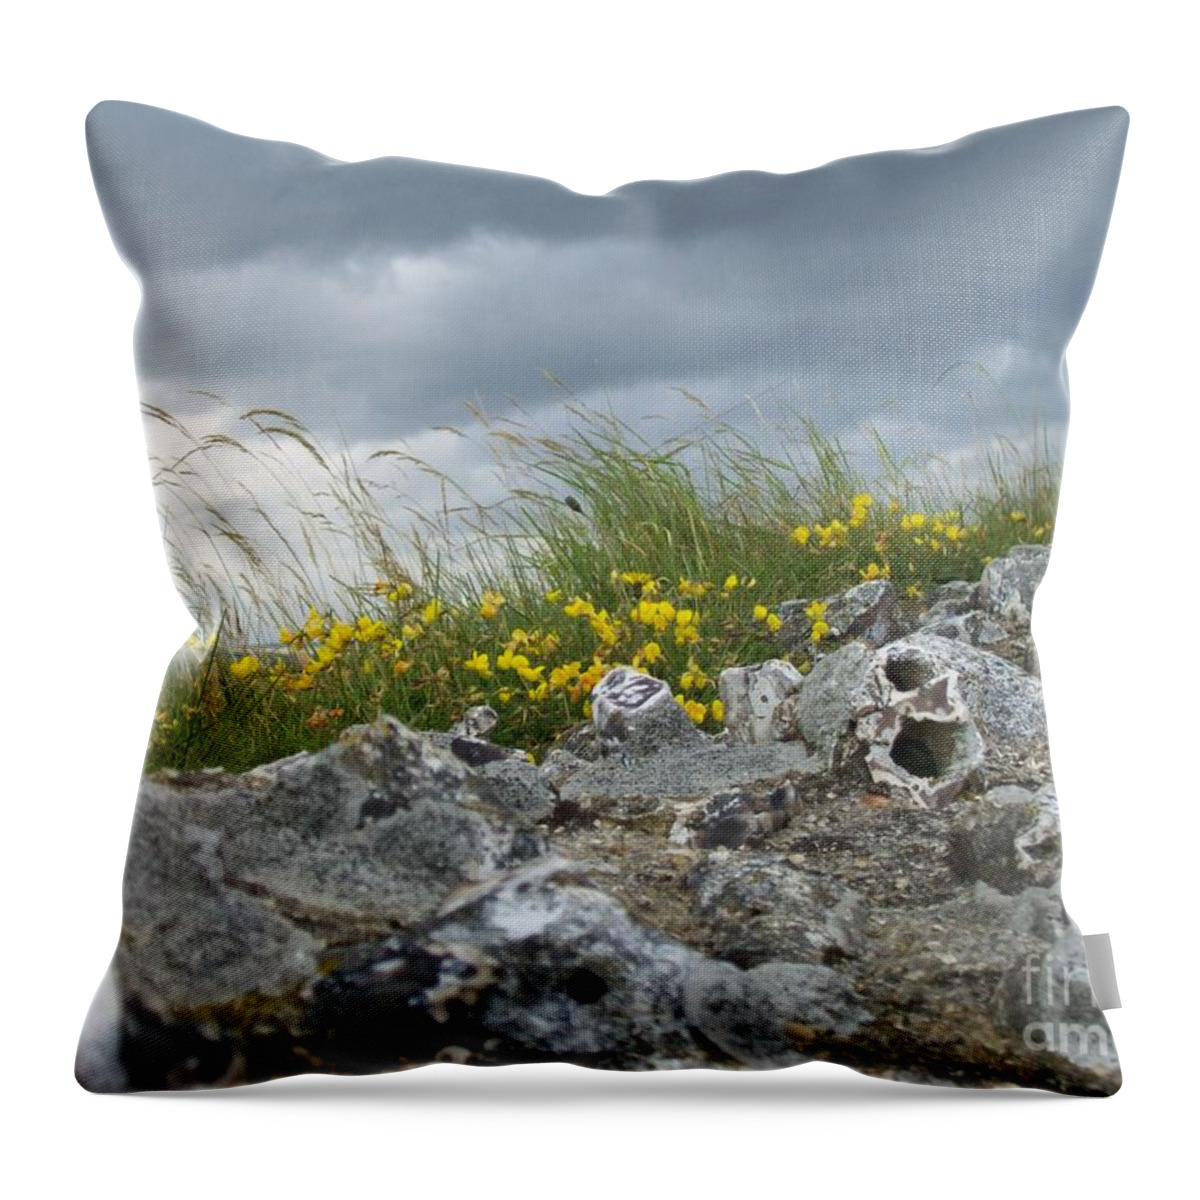 Old Throw Pillow featuring the photograph Striking Ruins by Mary Mikawoz